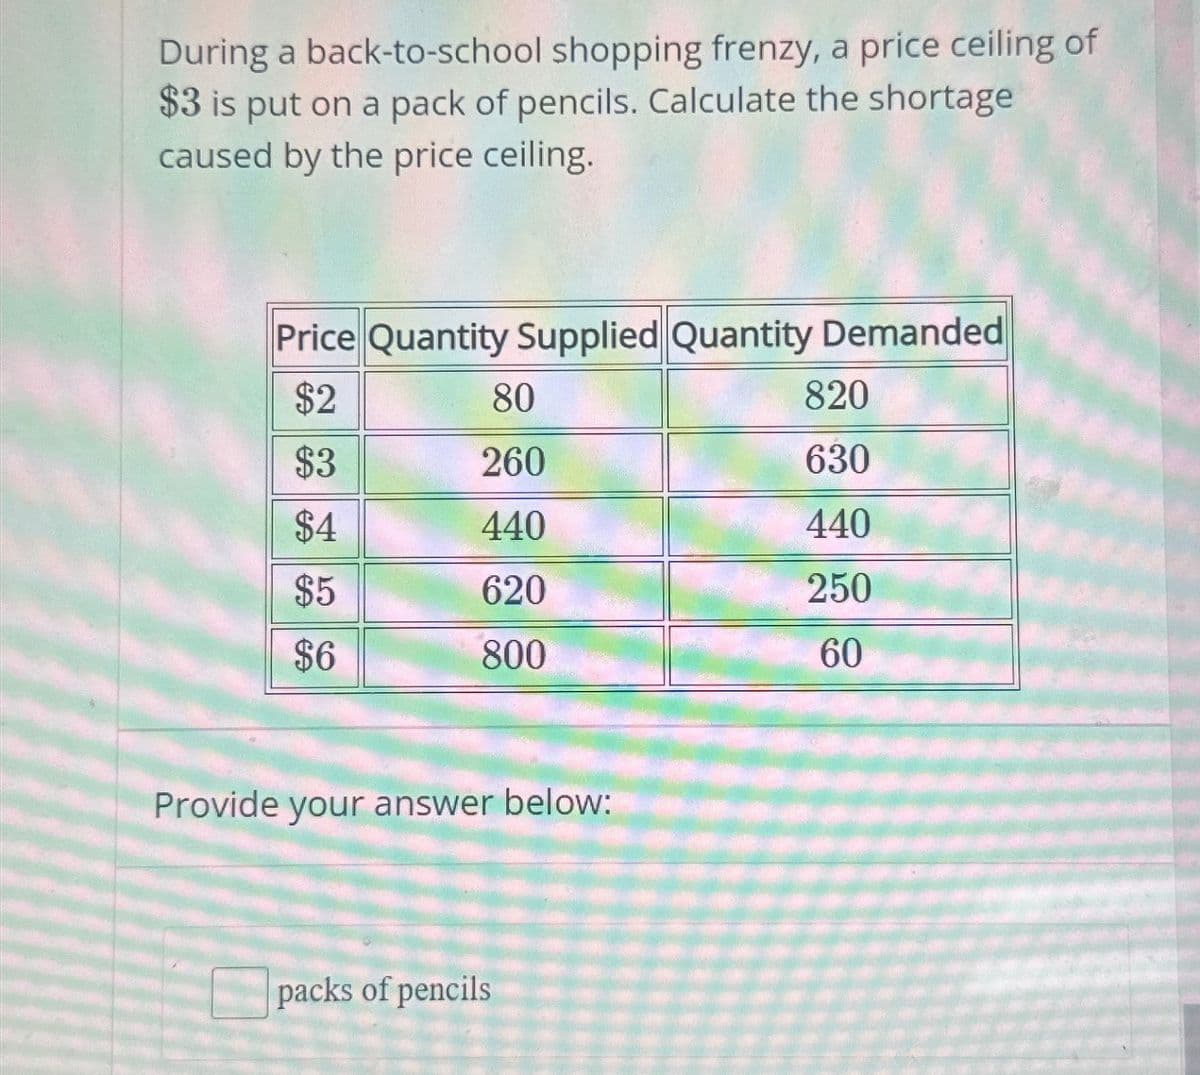 During a back-to-school shopping frenzy, a price ceiling of
$3 is put on a pack of pencils. Calculate the shortage
caused by the price ceiling.
Price Quantity Supplied Quantity Demanded
$2
$3
$4
$5
$6
80
260
440
620
800
Provide your answer below:
packs of pencils
820
630
440
250
60